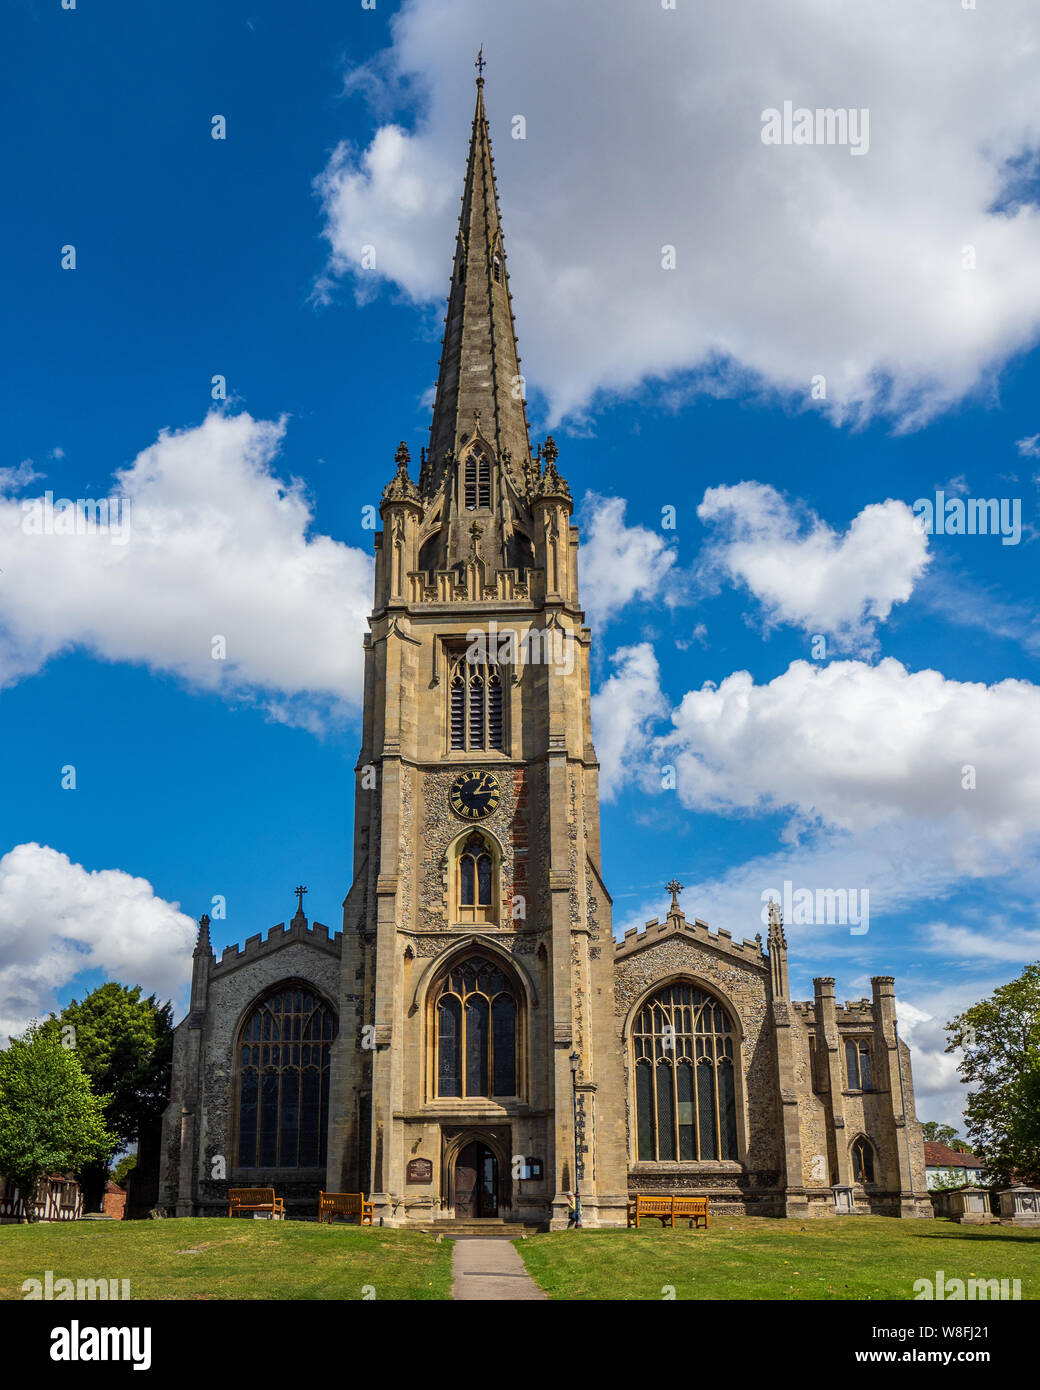 St Mary the Virgin Saffron Walden, Essex. It is the largest non-cathedral church in Essex. Built 1250 to 1258 on earlier wood church. Stock Photo